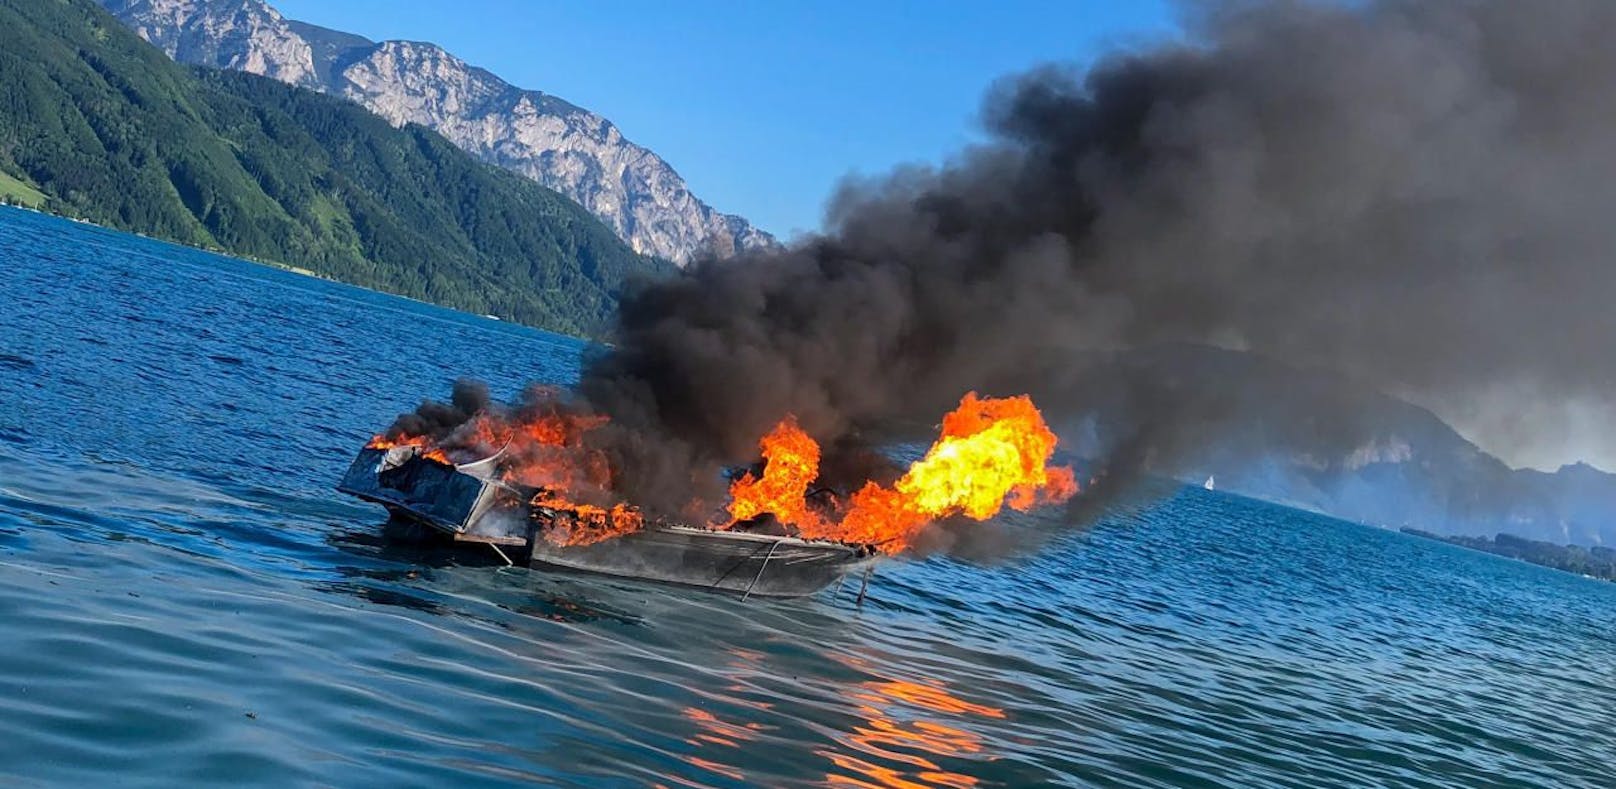 Motorboot am Attersee in Brand geraten